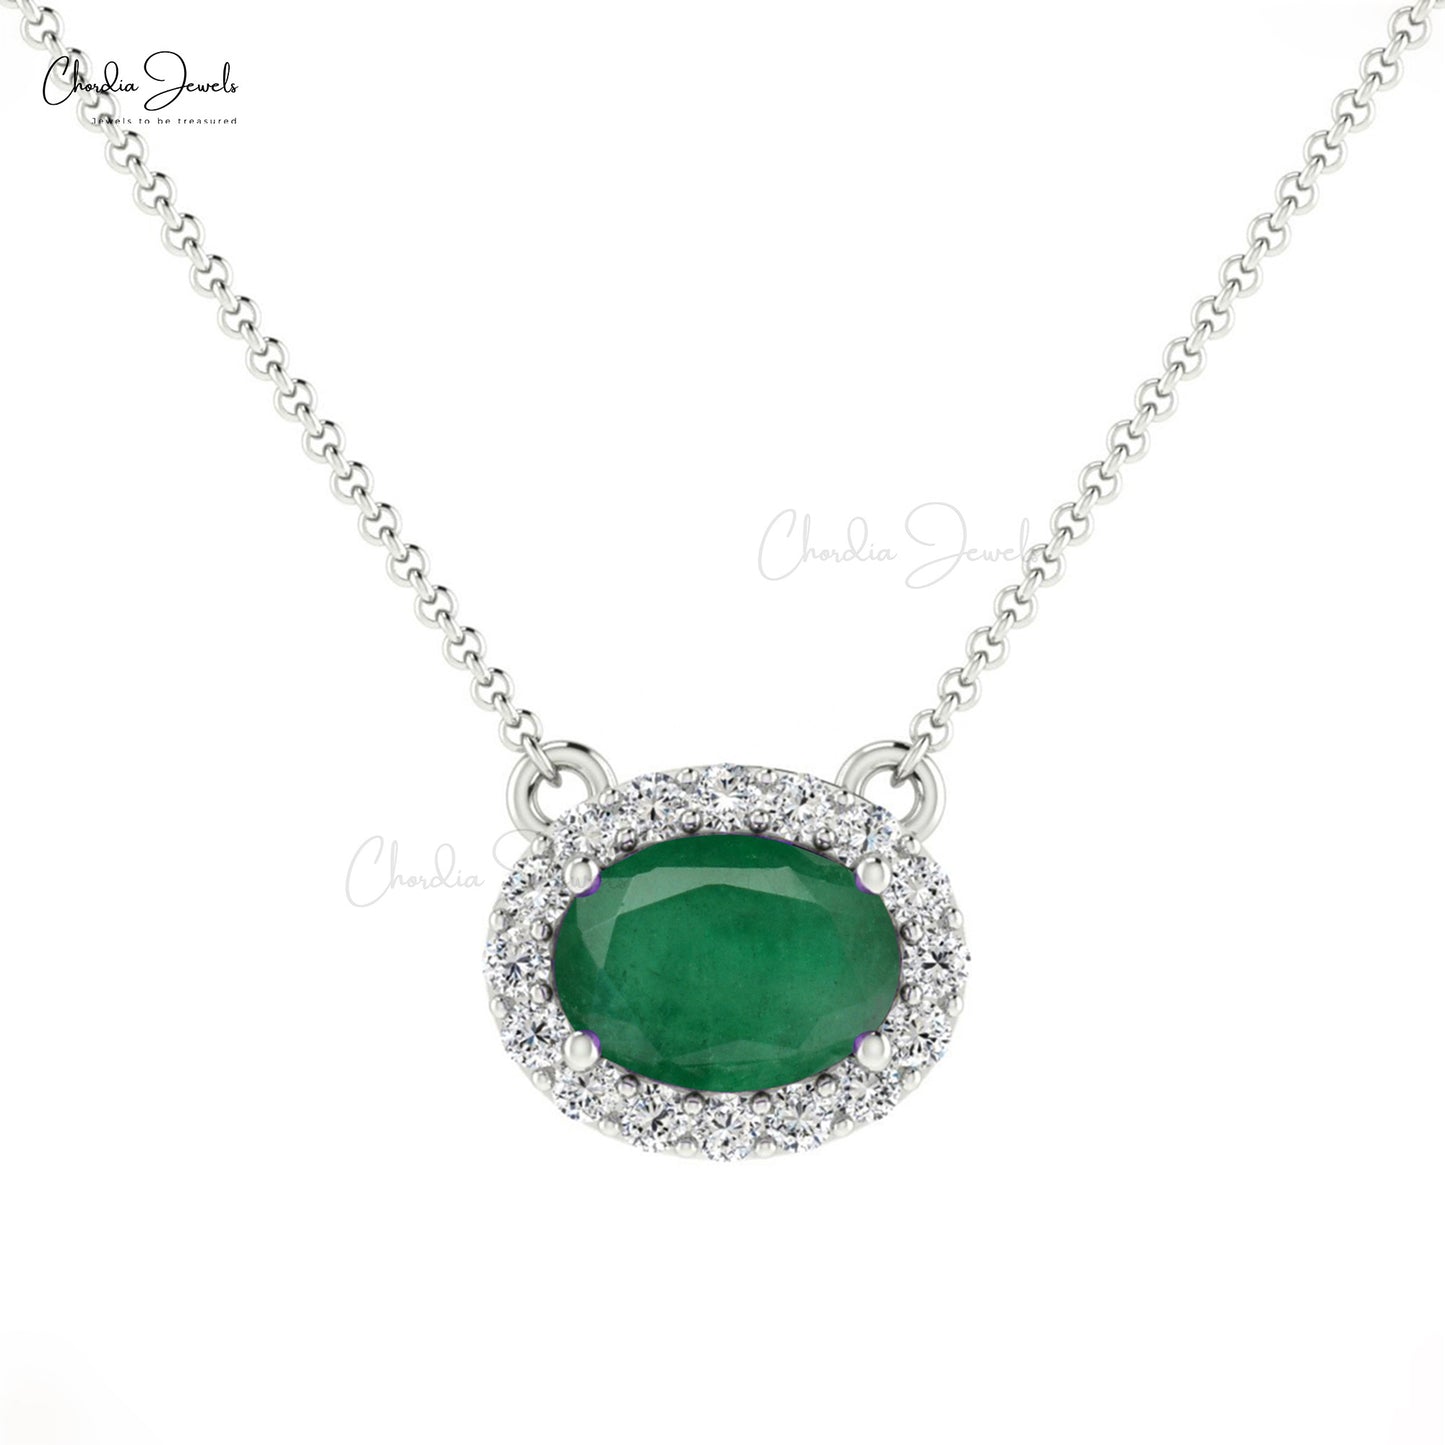 Oval 0.7ct Emerald Diamond Halo Necklace 14k Solid Gold Prong Set Women's Gemstone Necklace